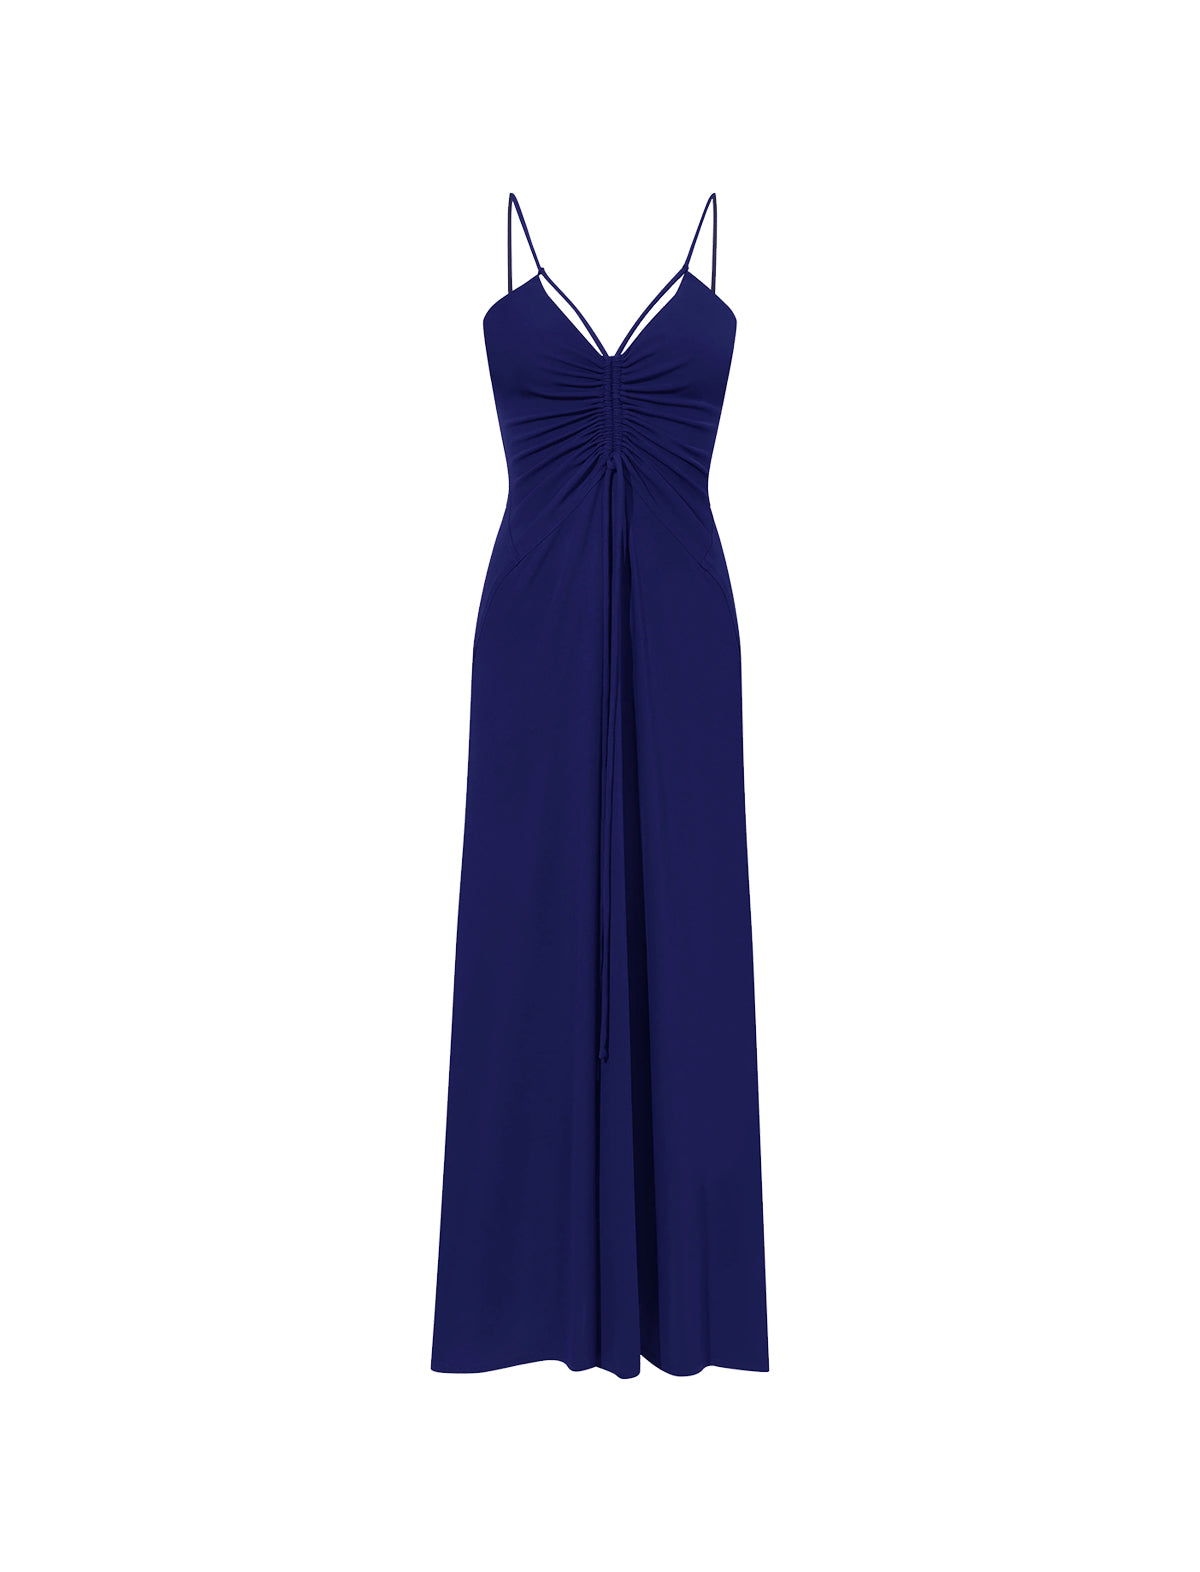 PROENZA SCHOULER WHITE LABEL Ruched Jersey Midi Dress in Blueberry